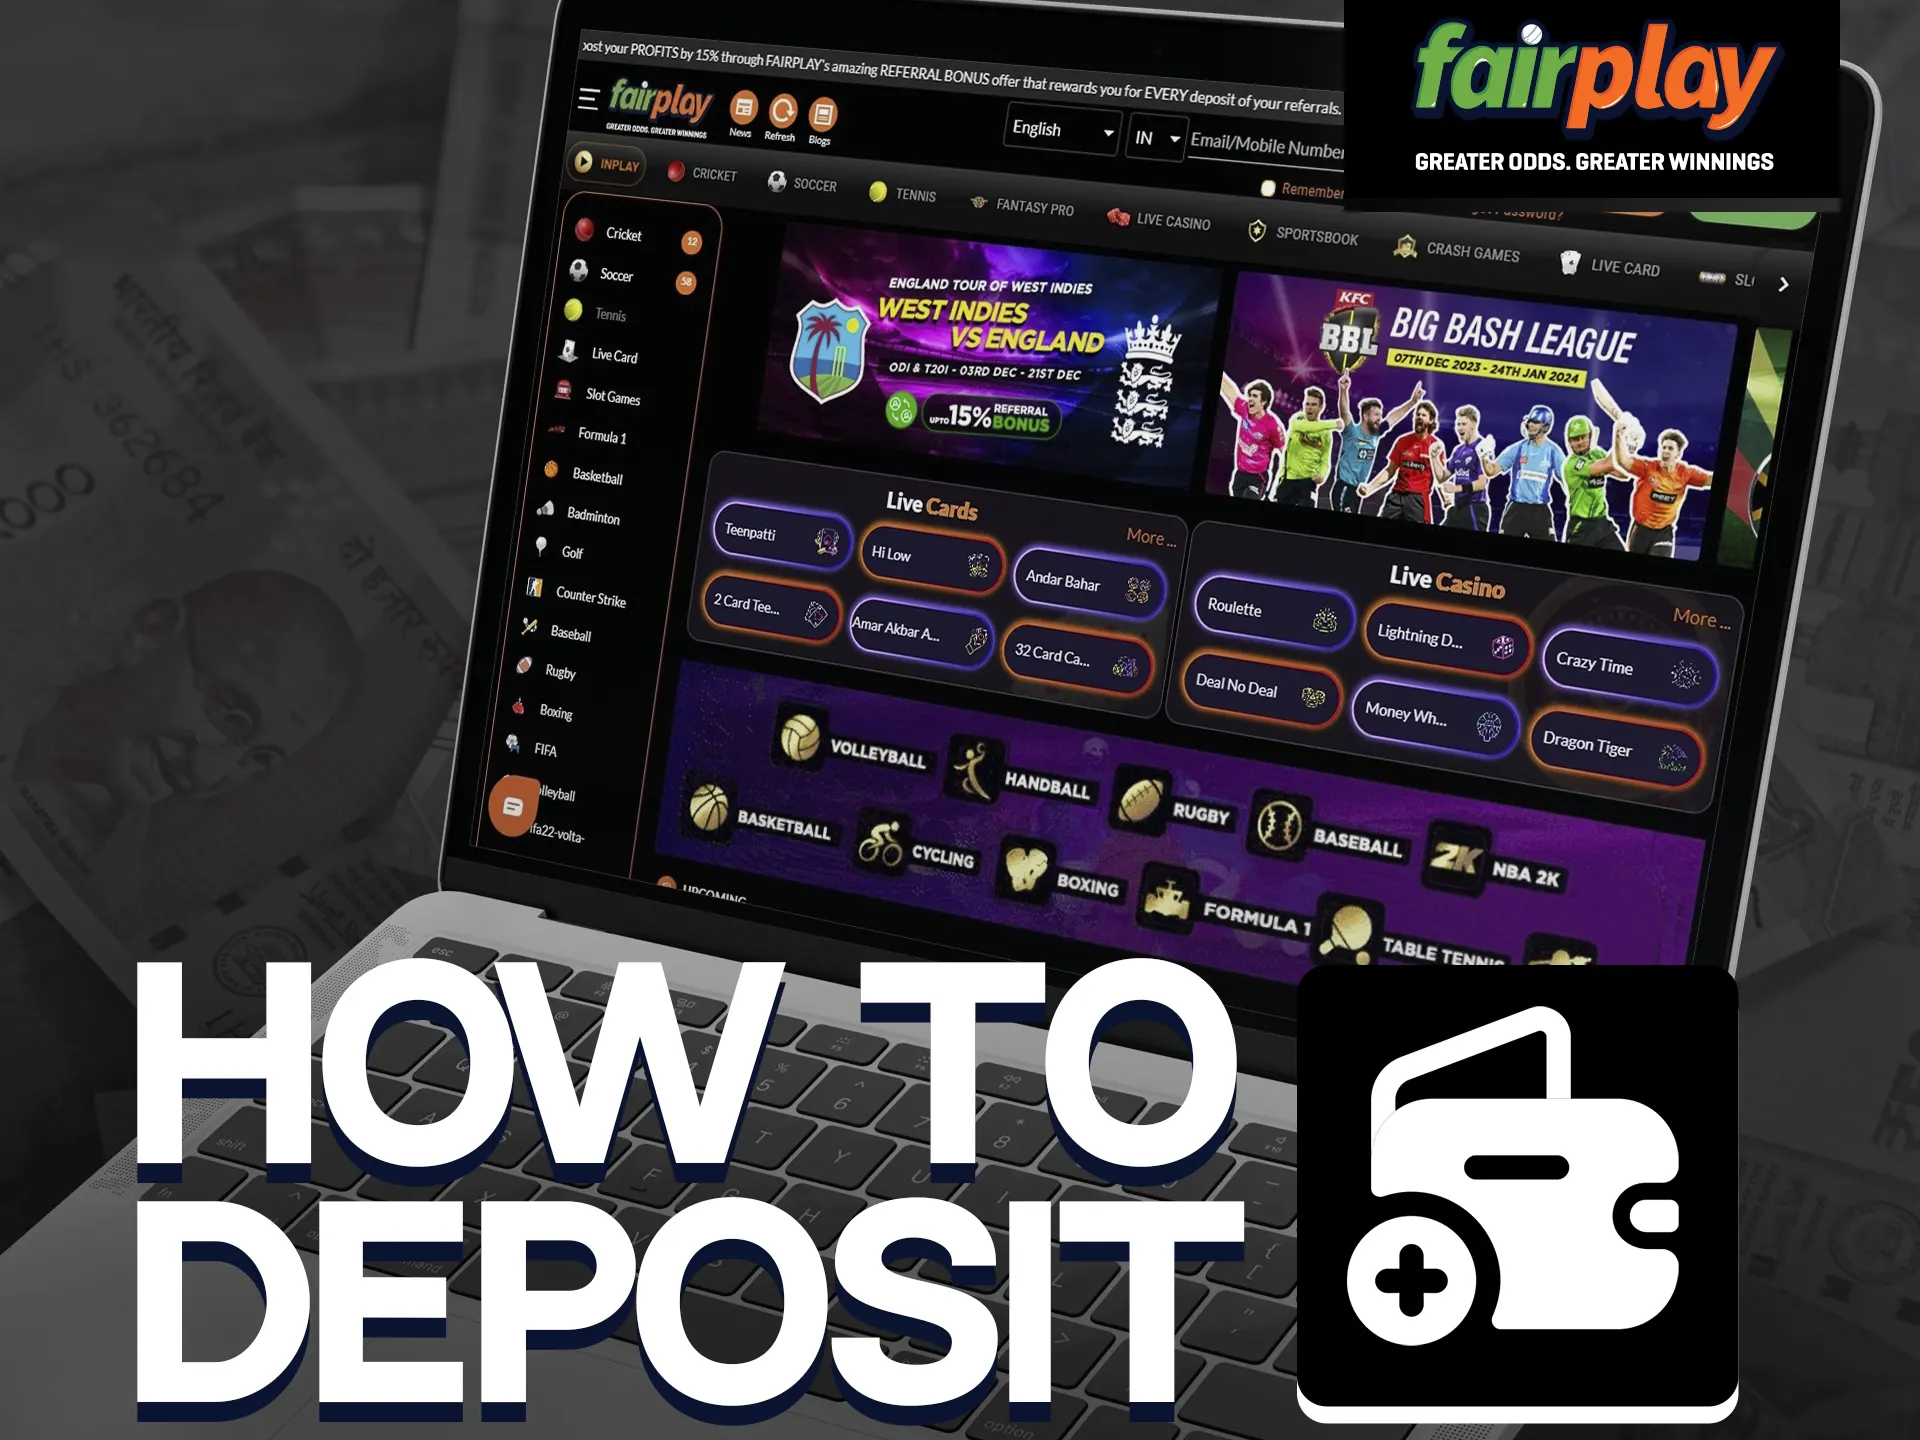 To deposit at Fairplay, log in, click Deposit, enter details, transfer, and wait.